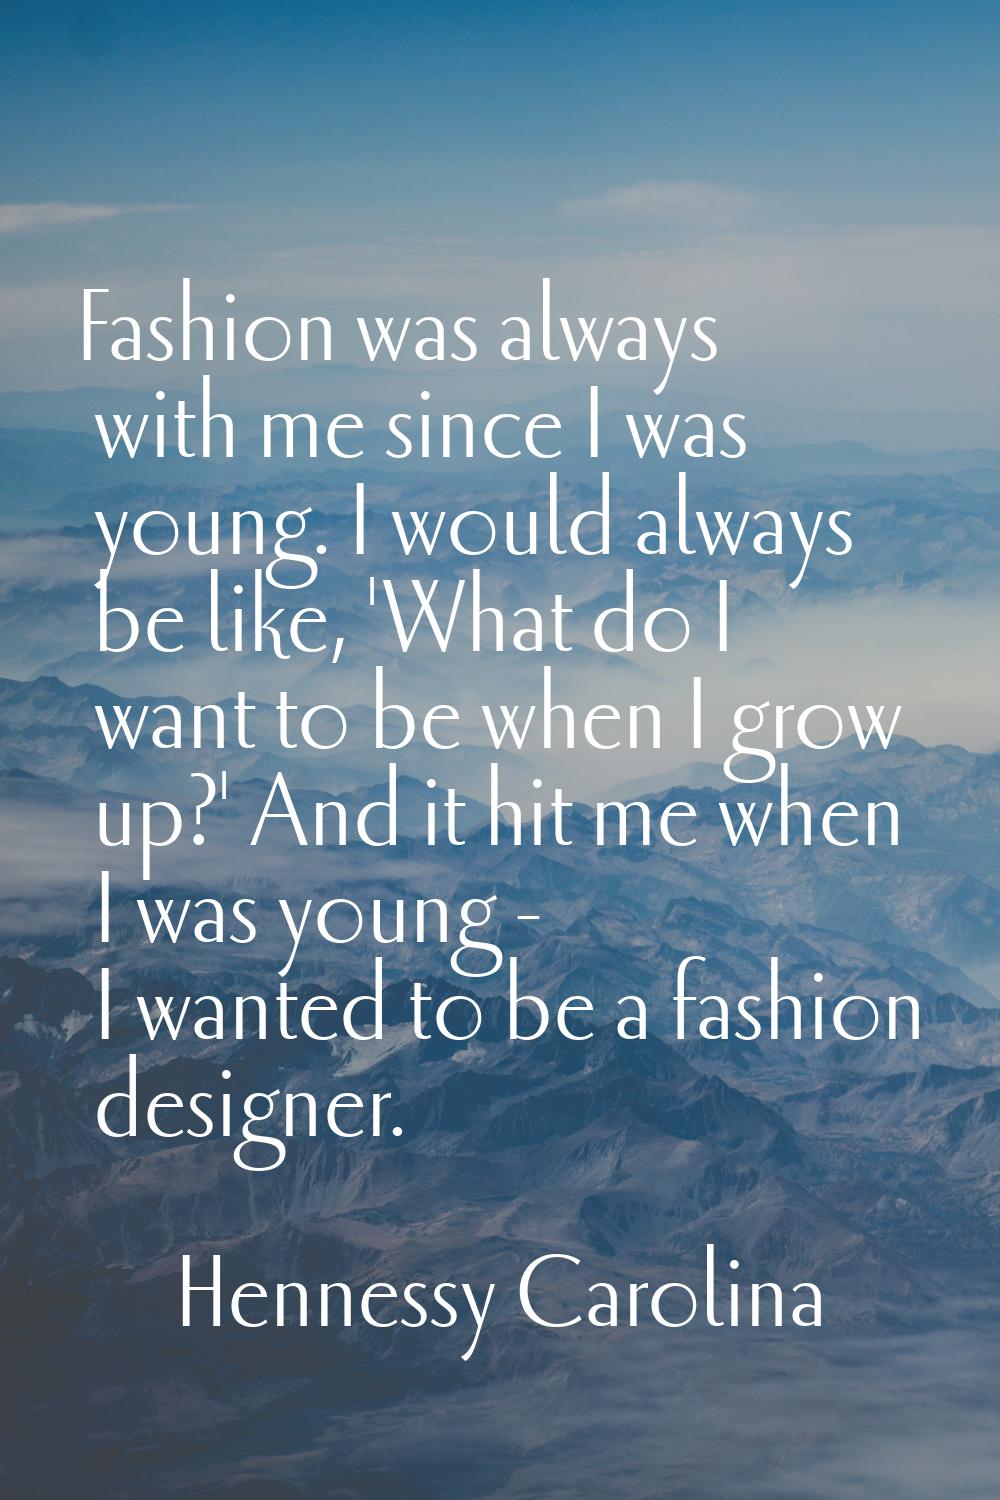 Fashion was always with me since I was young. I would always be like, 'What do I want to be when I 